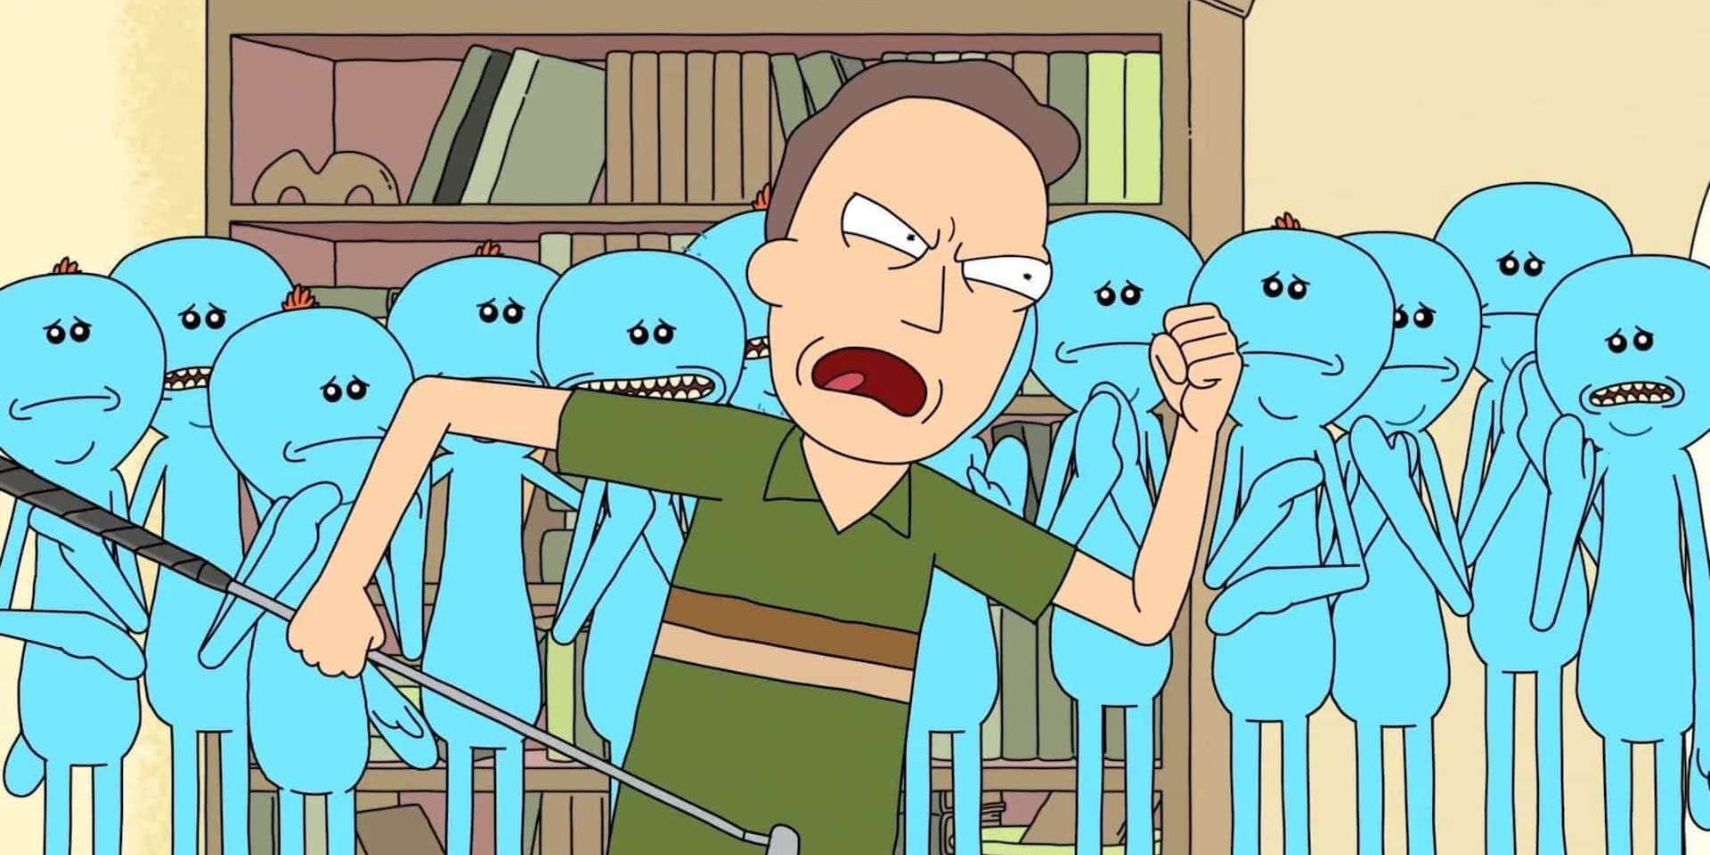 Jerry yelling holding golf club in Rick and Morty